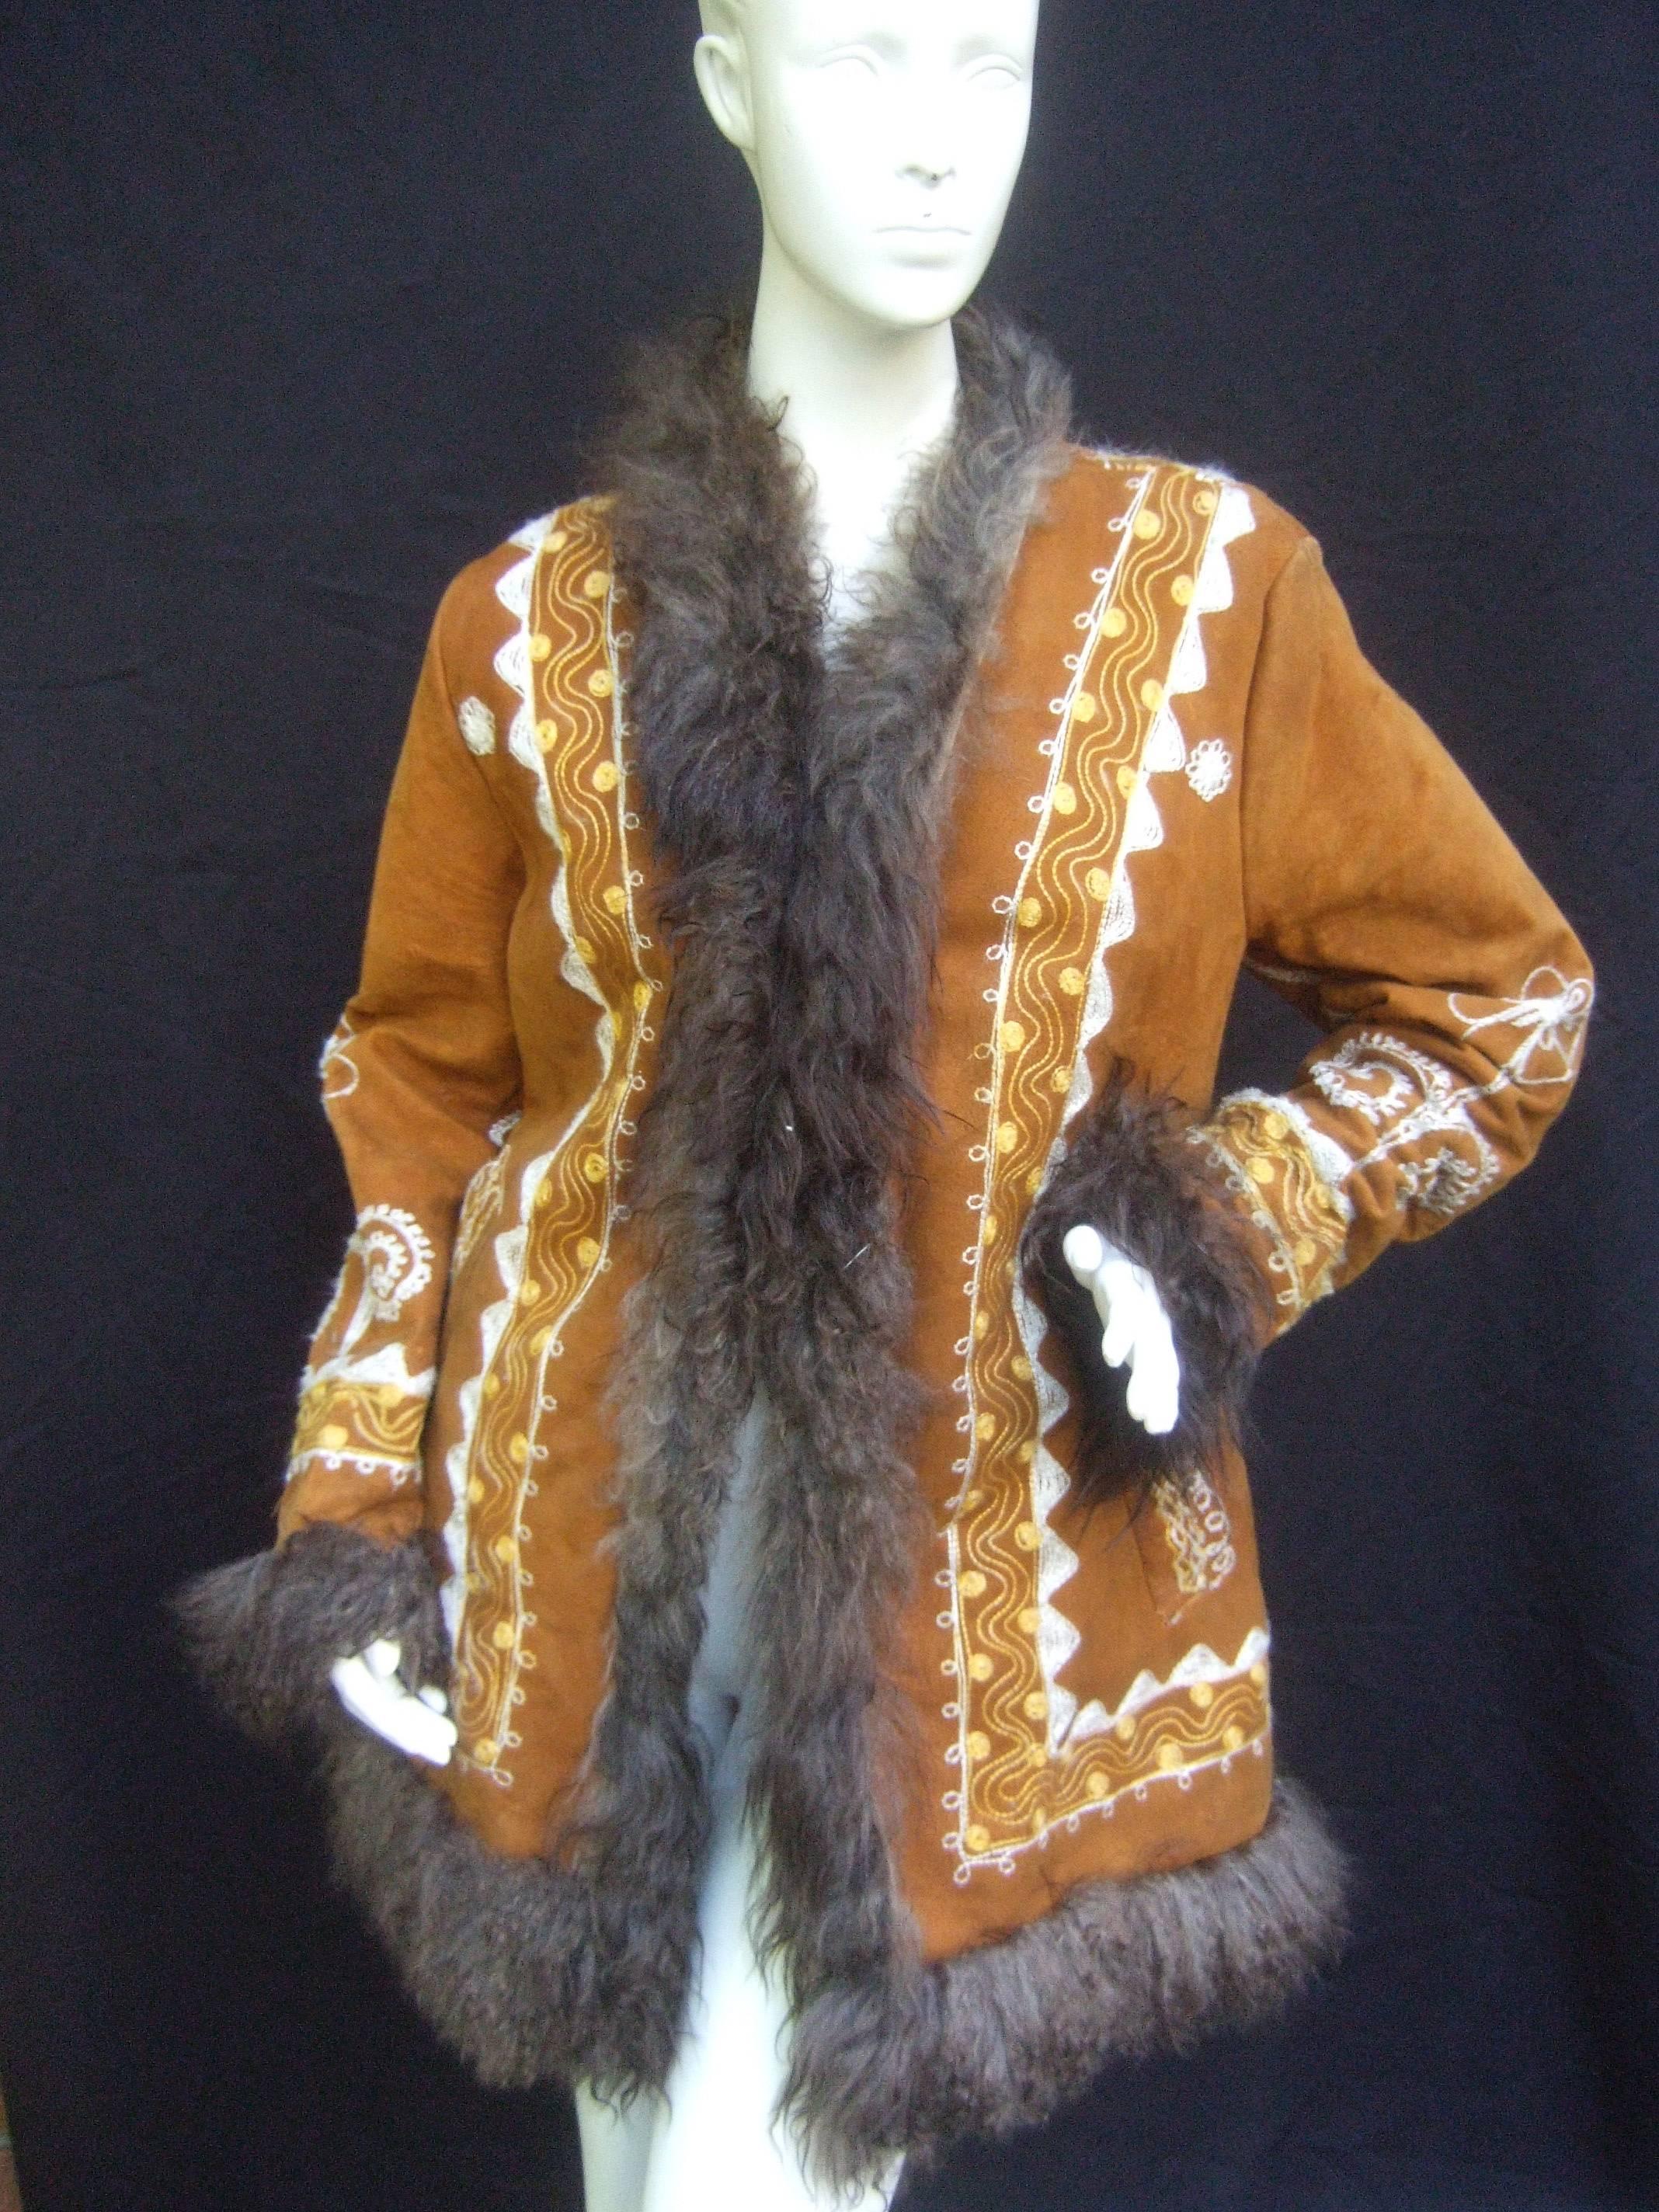 Genuine Afghan suede embroidered coat 
The boho style coat is designed fluffy
brown curly fur that runs down the front 
and circles the hemline

The caramel brown suede exterior 
is designed with elaborate embroidery
that extends to the